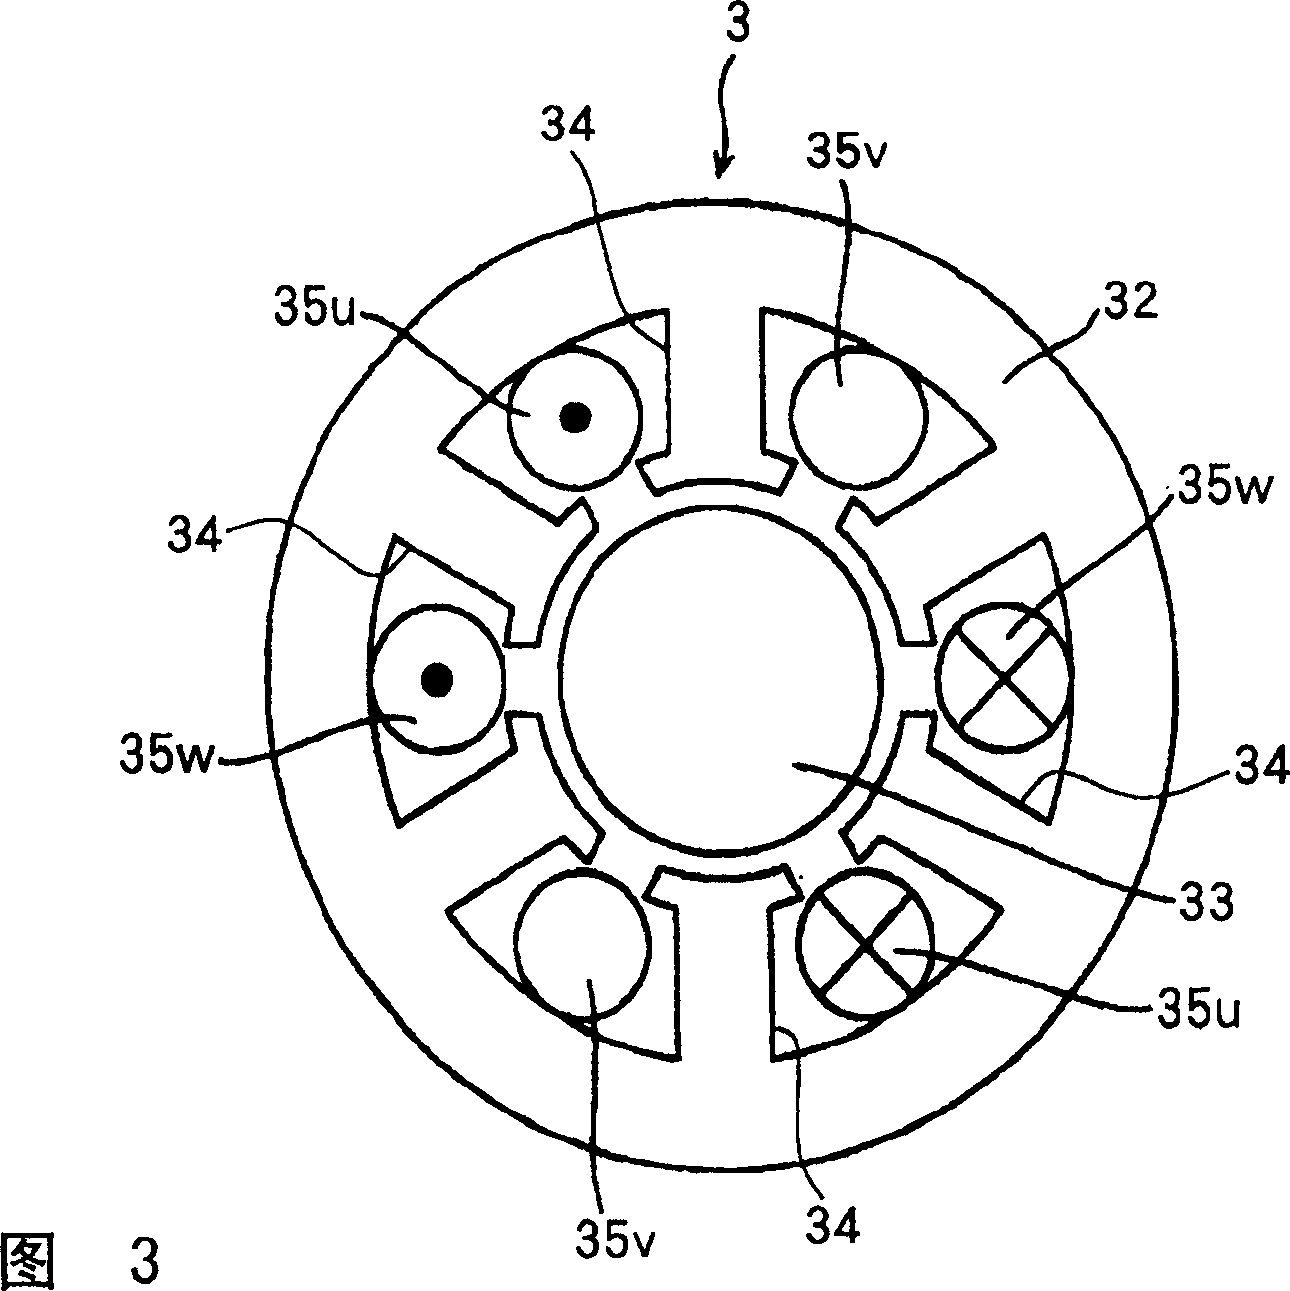 Control equipment of brushless motor and washing machine with the same equipment